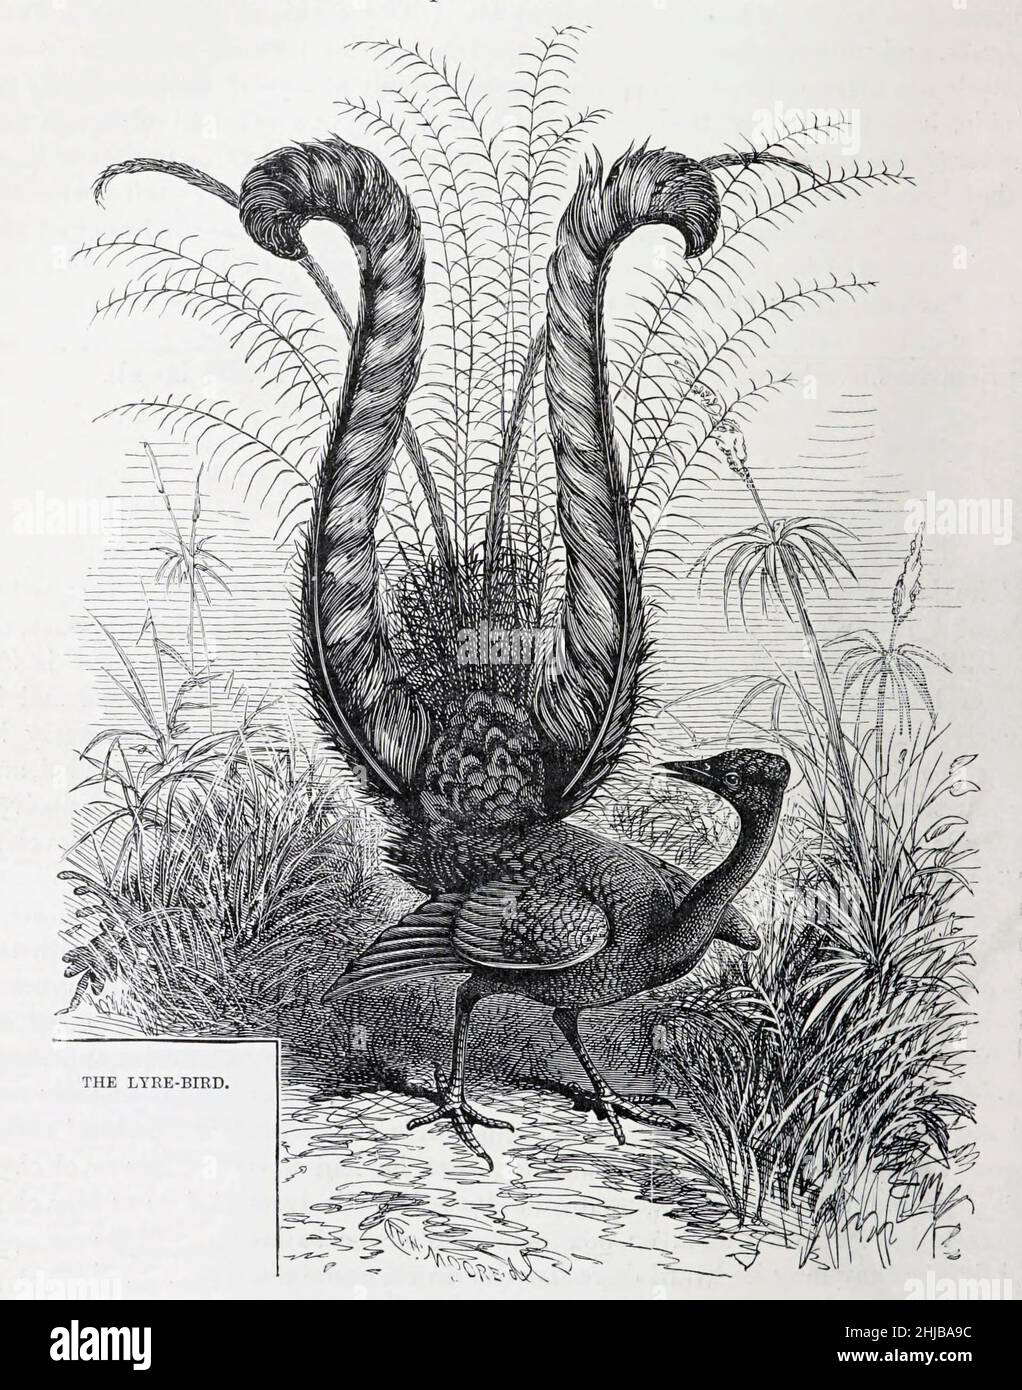 Male superb lyrebird or Lyre-Bird (Menura novaehollandiae) displaying his fancy tail, from the The royal natural history edited by Richard Lydekker, Volume III published in 1893 Stock Photo